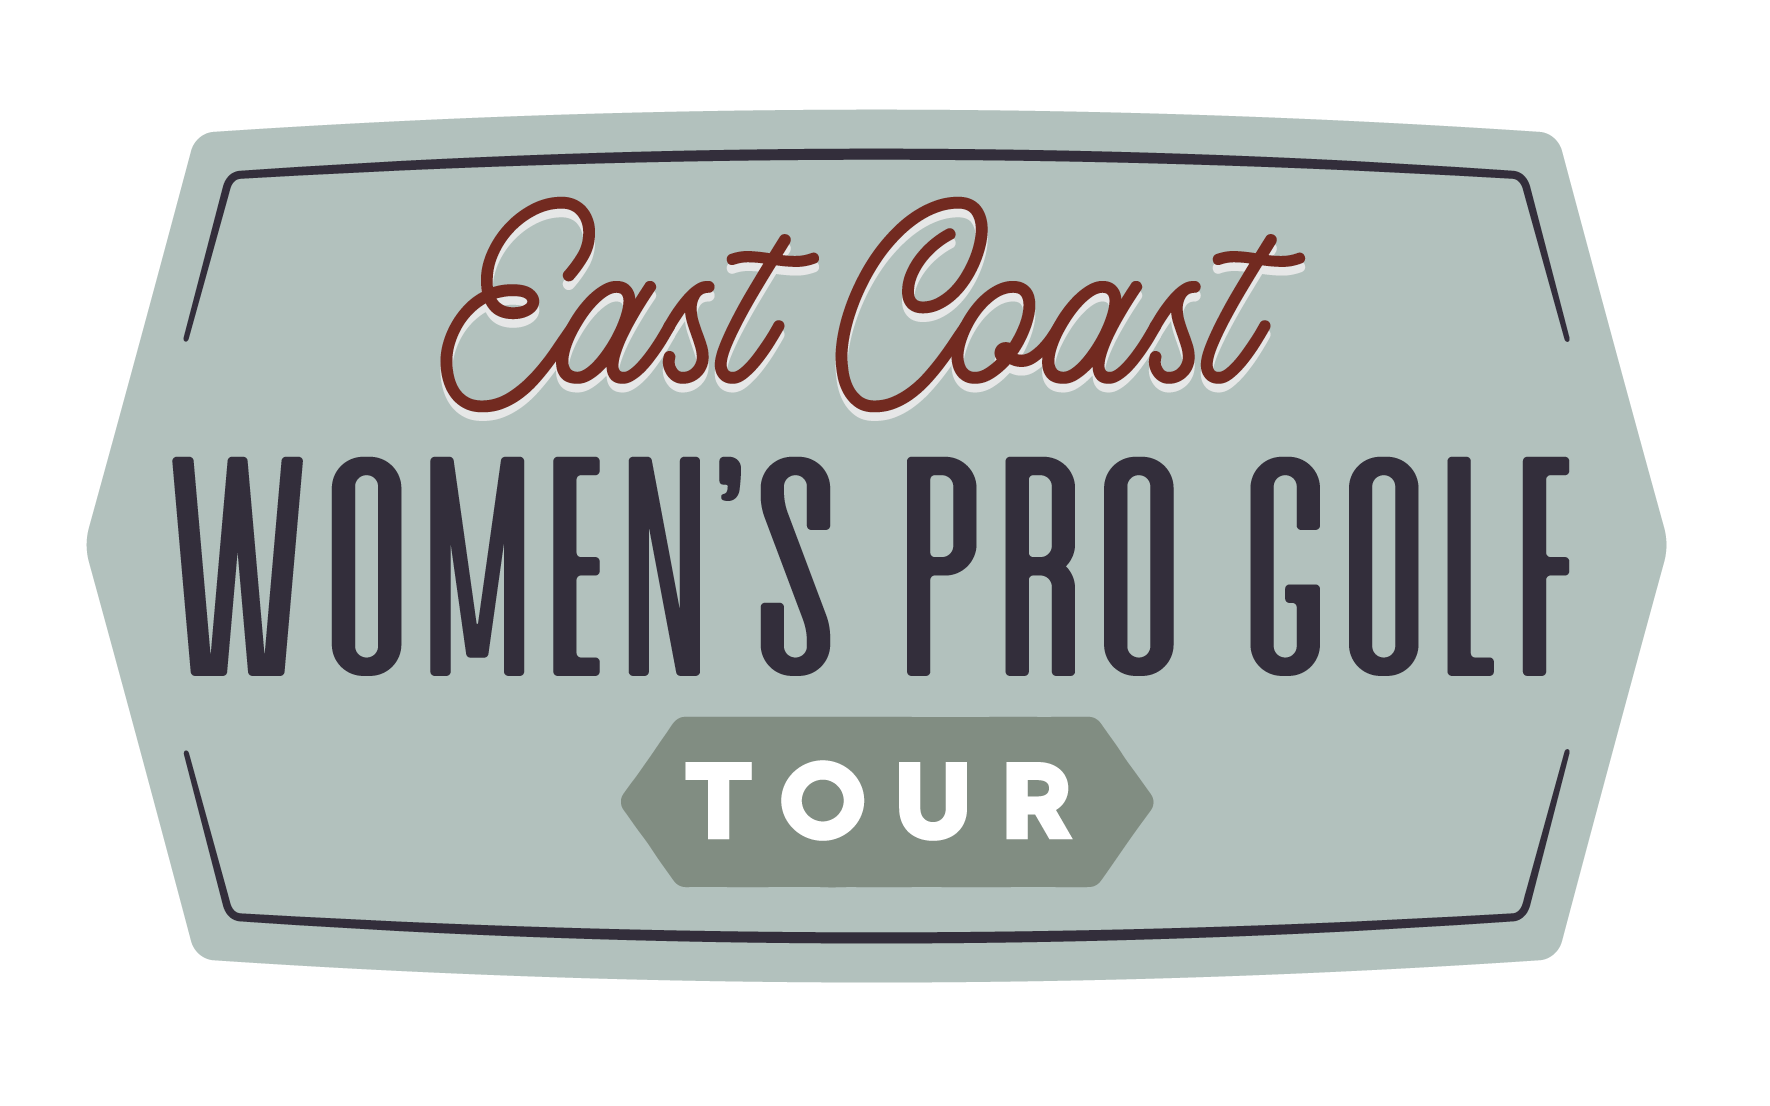 The East Coast Women’s Pro Golf Tour will have a winter and summer season. The tour begins Jan. 17 at the Black Bear Golf Club in Orlando.